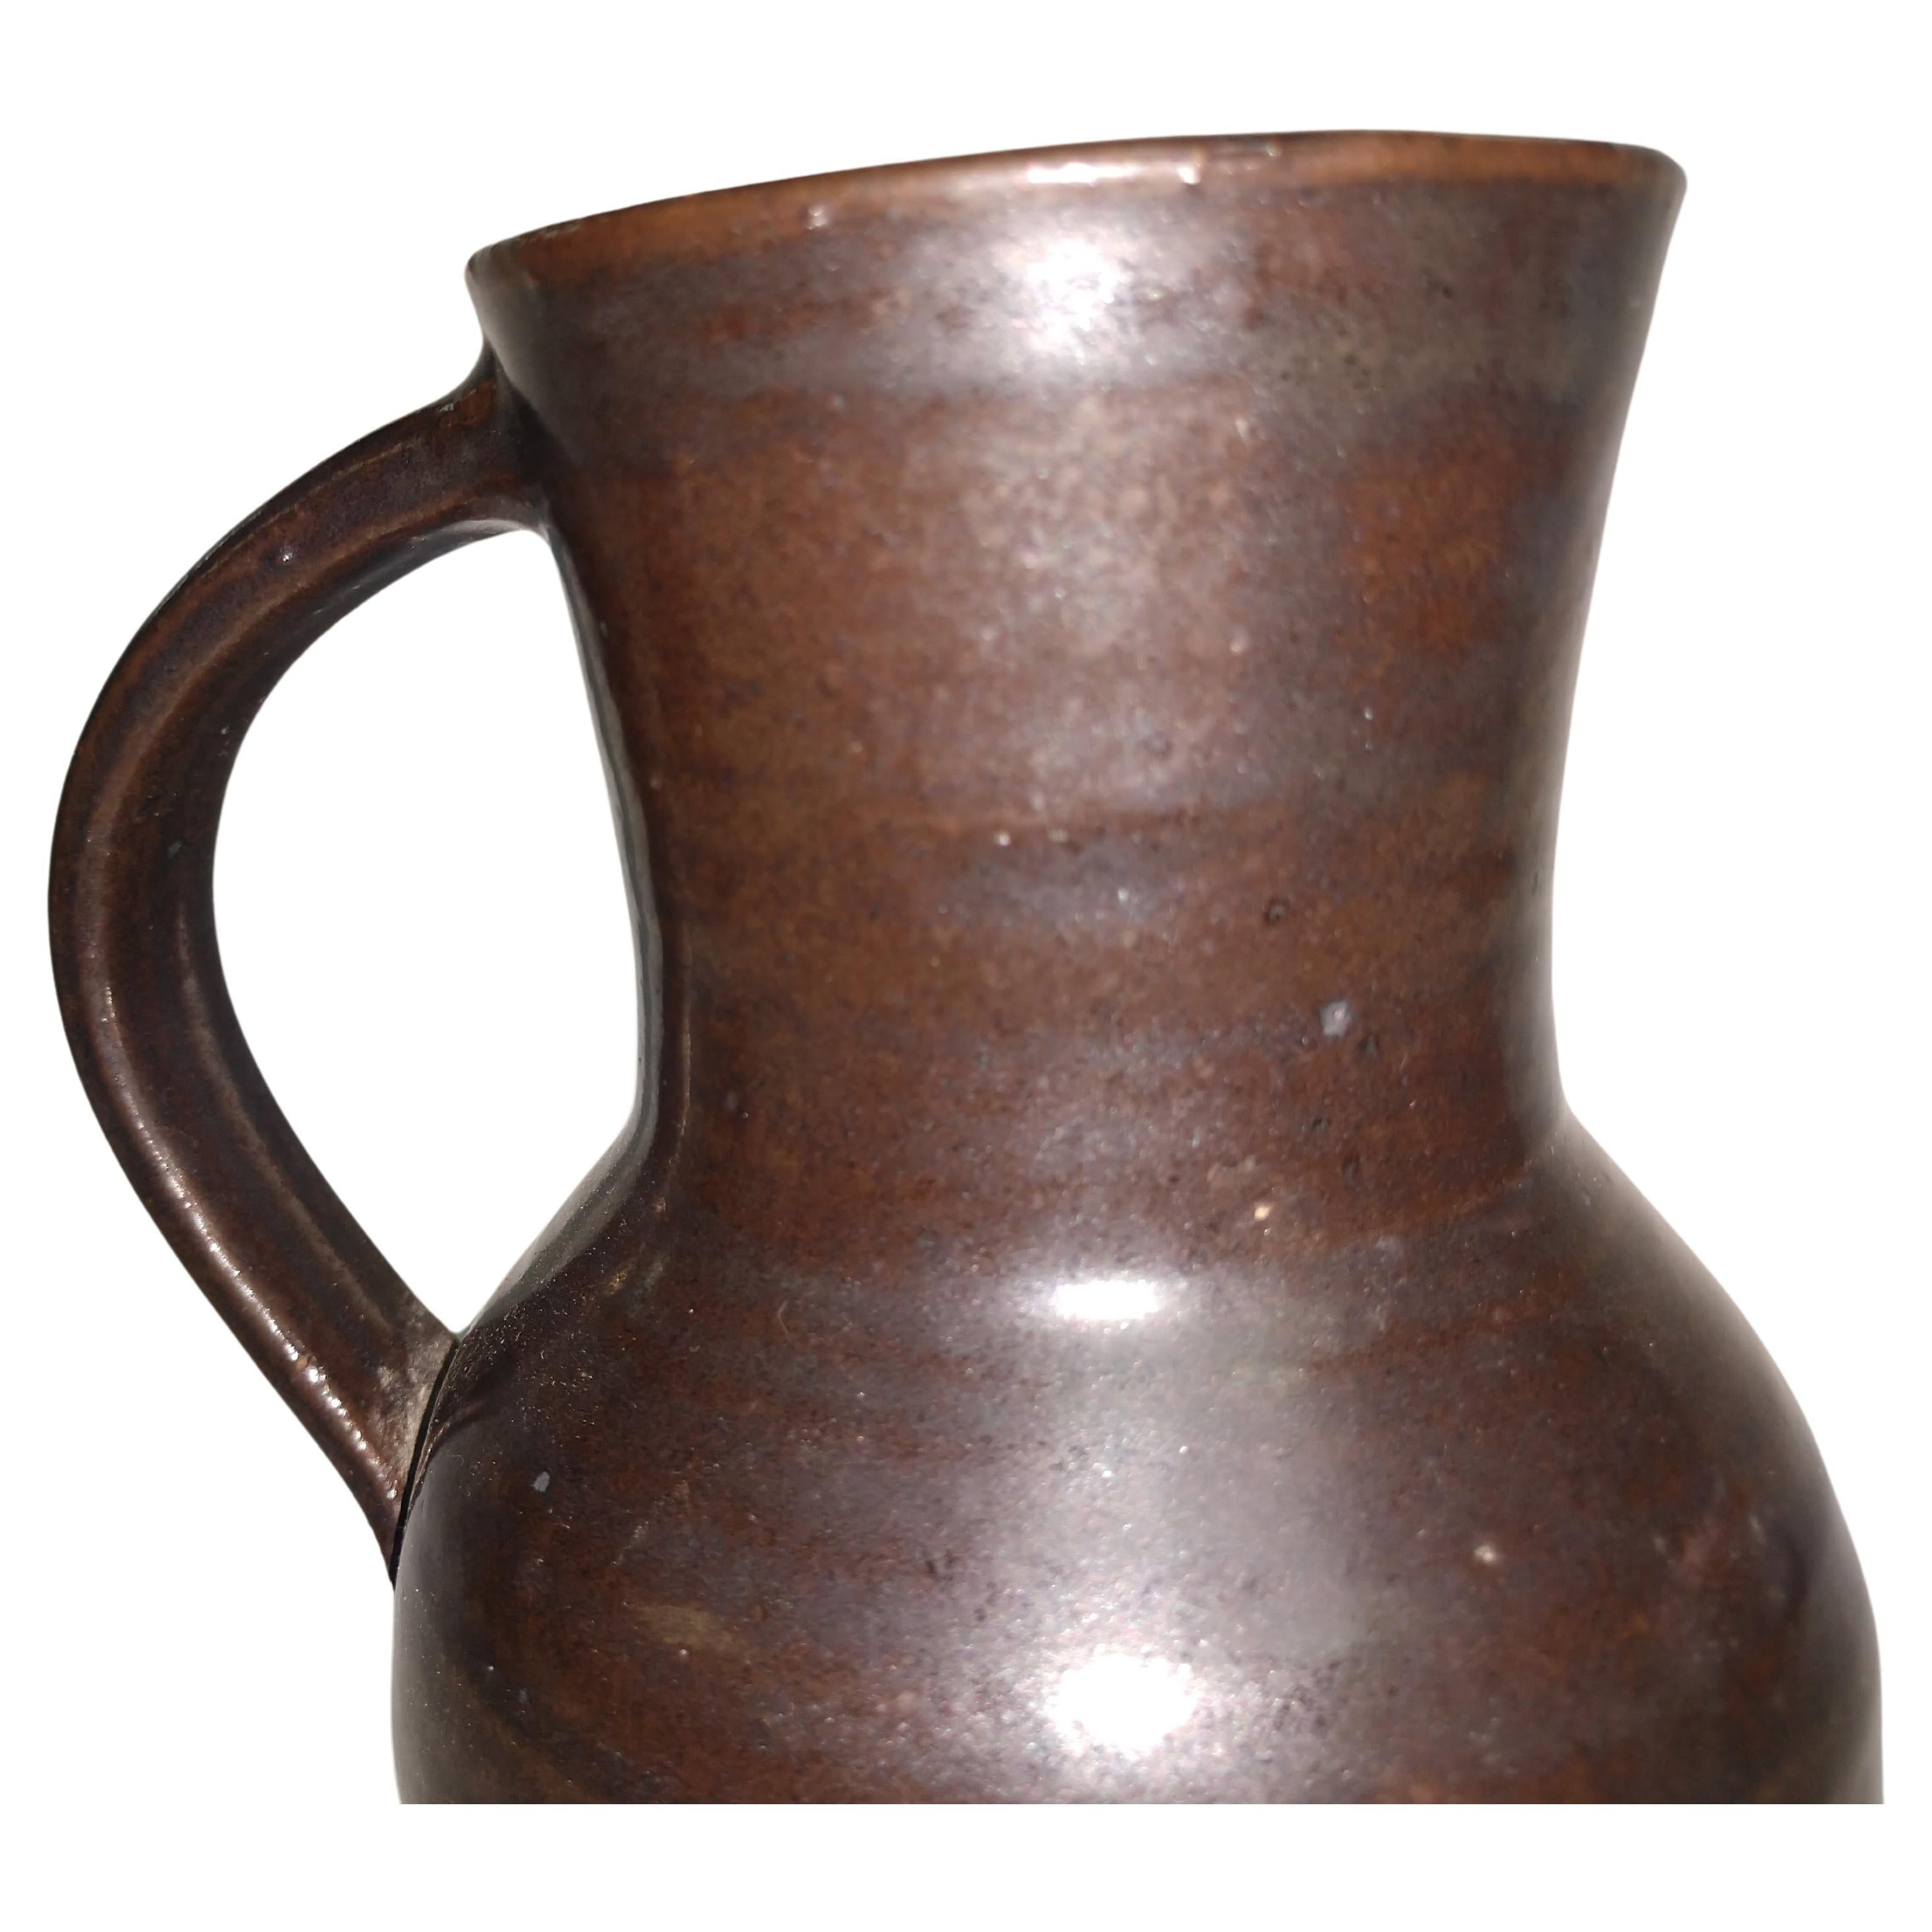 Fabulous hand thrown vase Jug with a deep brown glaze by Herbert Sargent.
Large handle gives it the look of a pitcher. A beautiful piece by Herbert Sargent who was a TV and movie writer who worked on the Johnny Carson Show and Saturday Night Live.